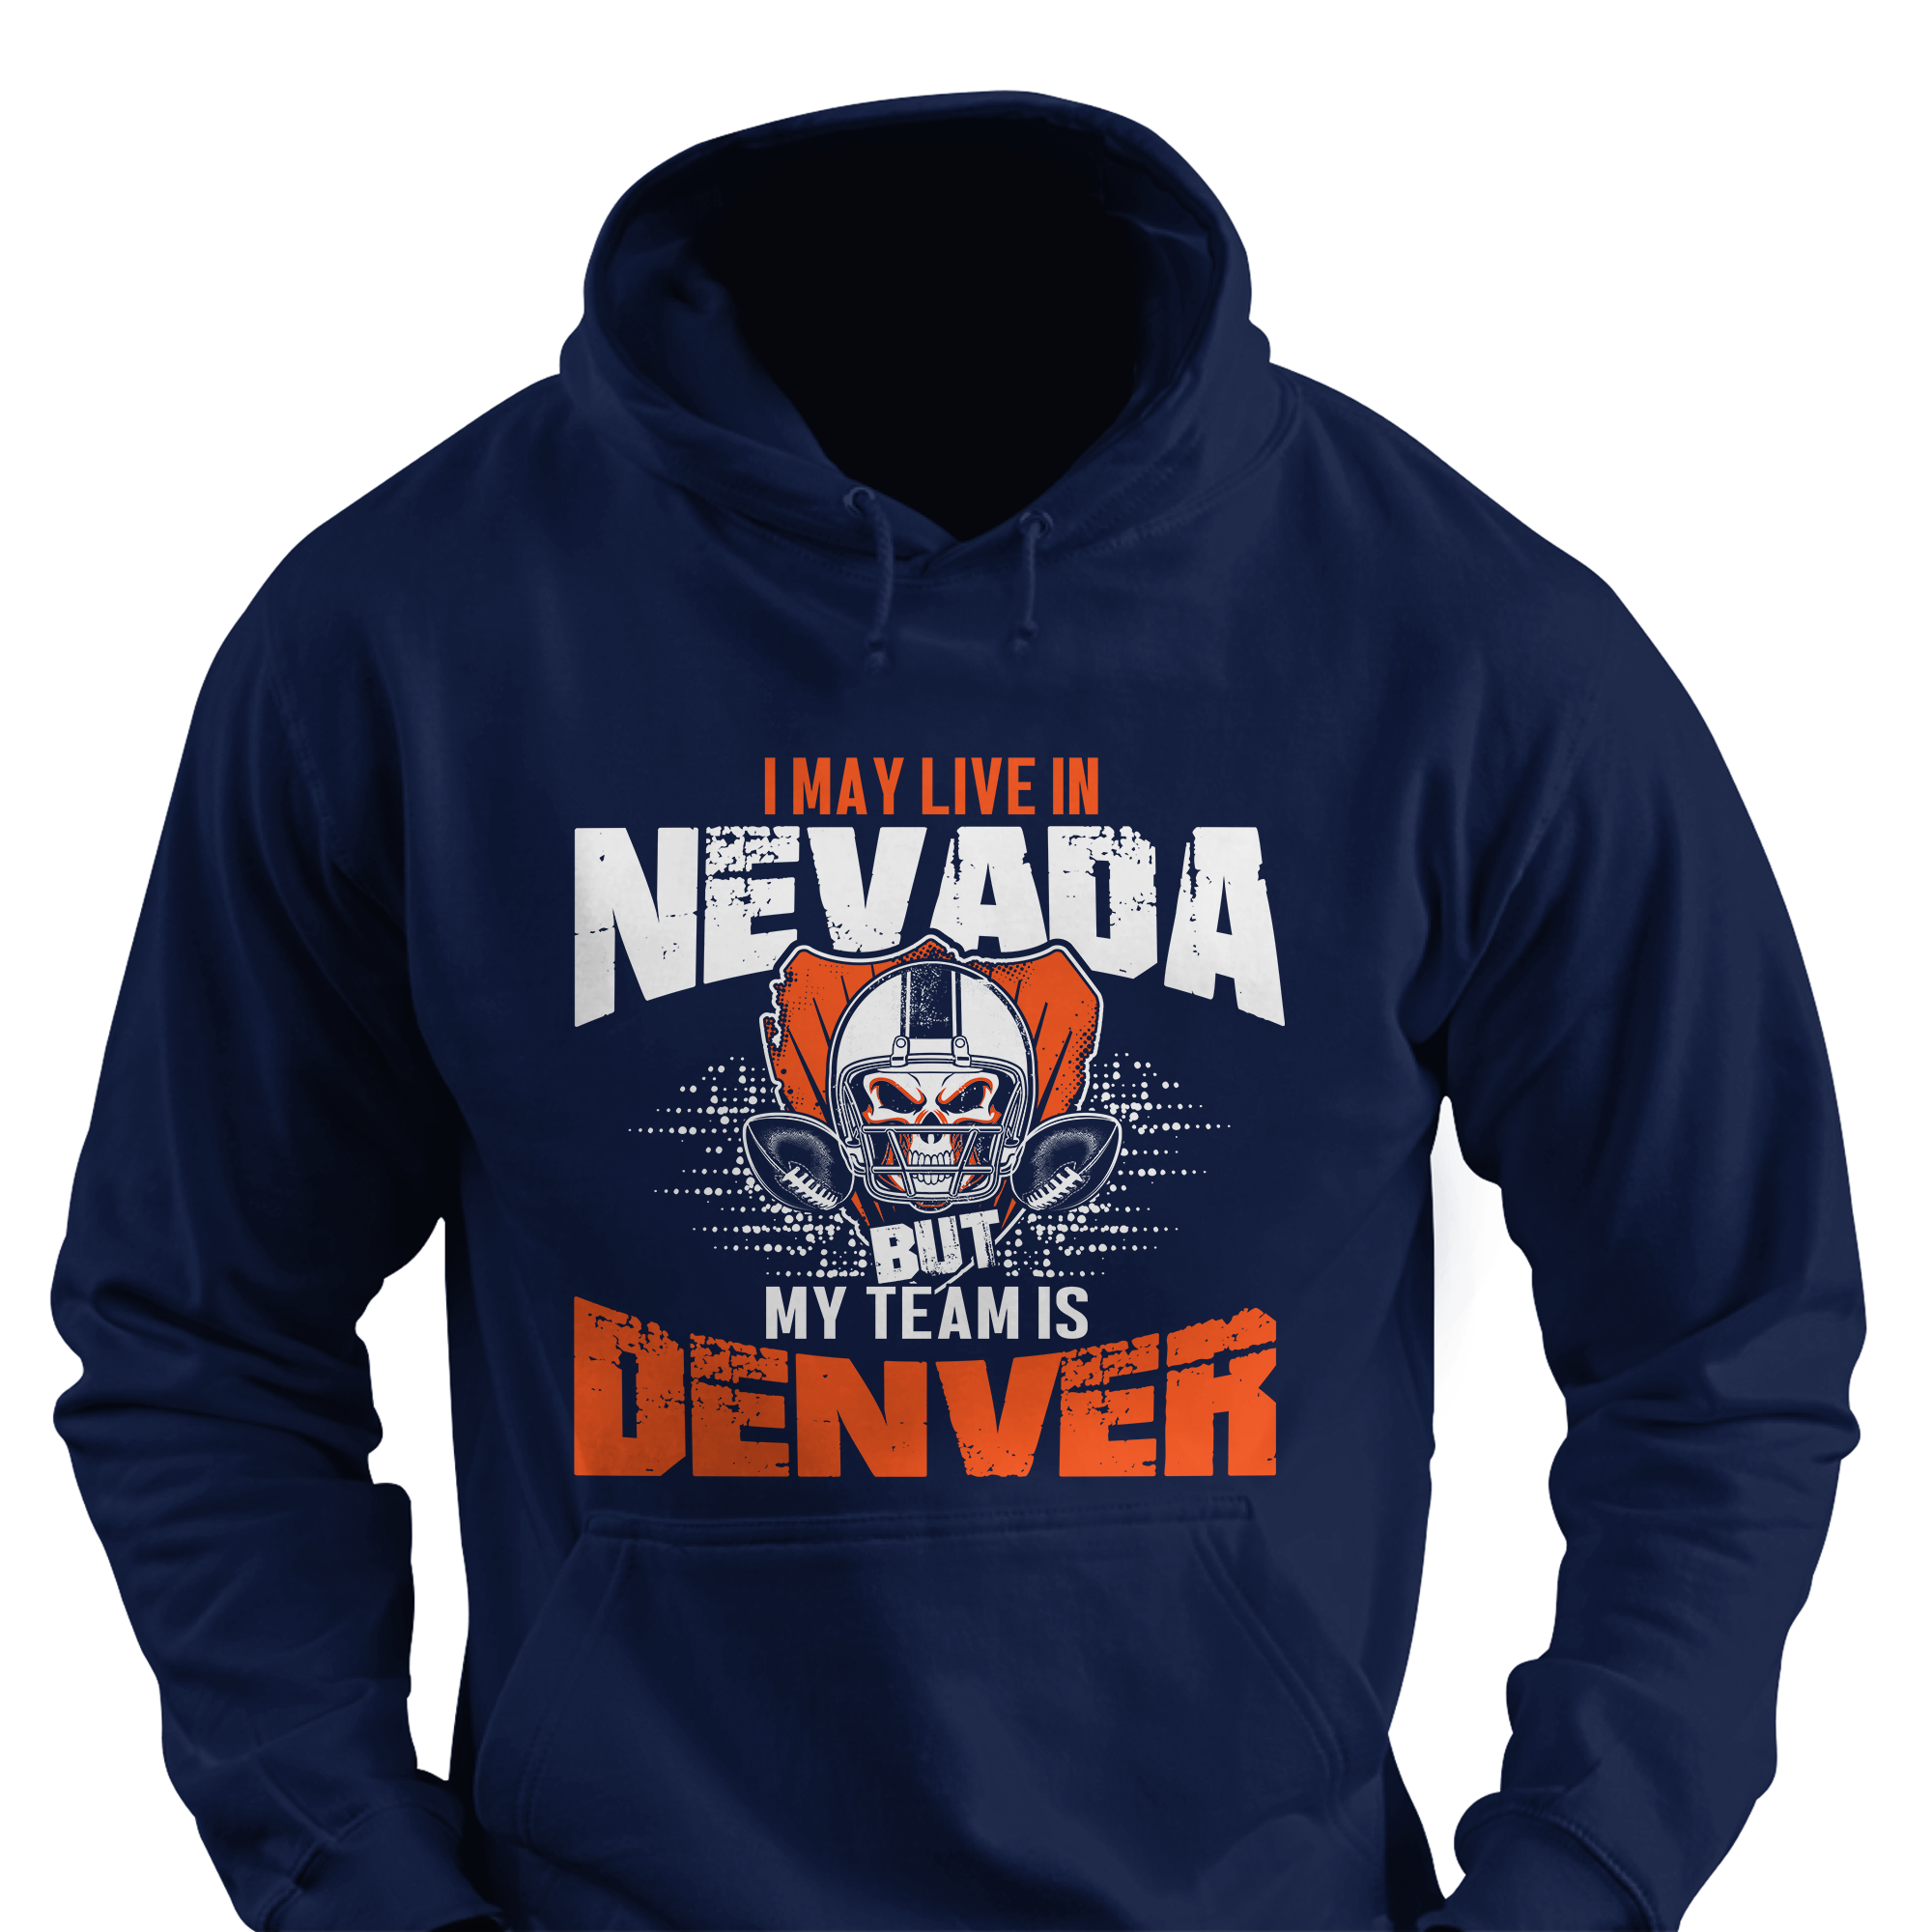 I May Live in Nevada but My Team is Denver